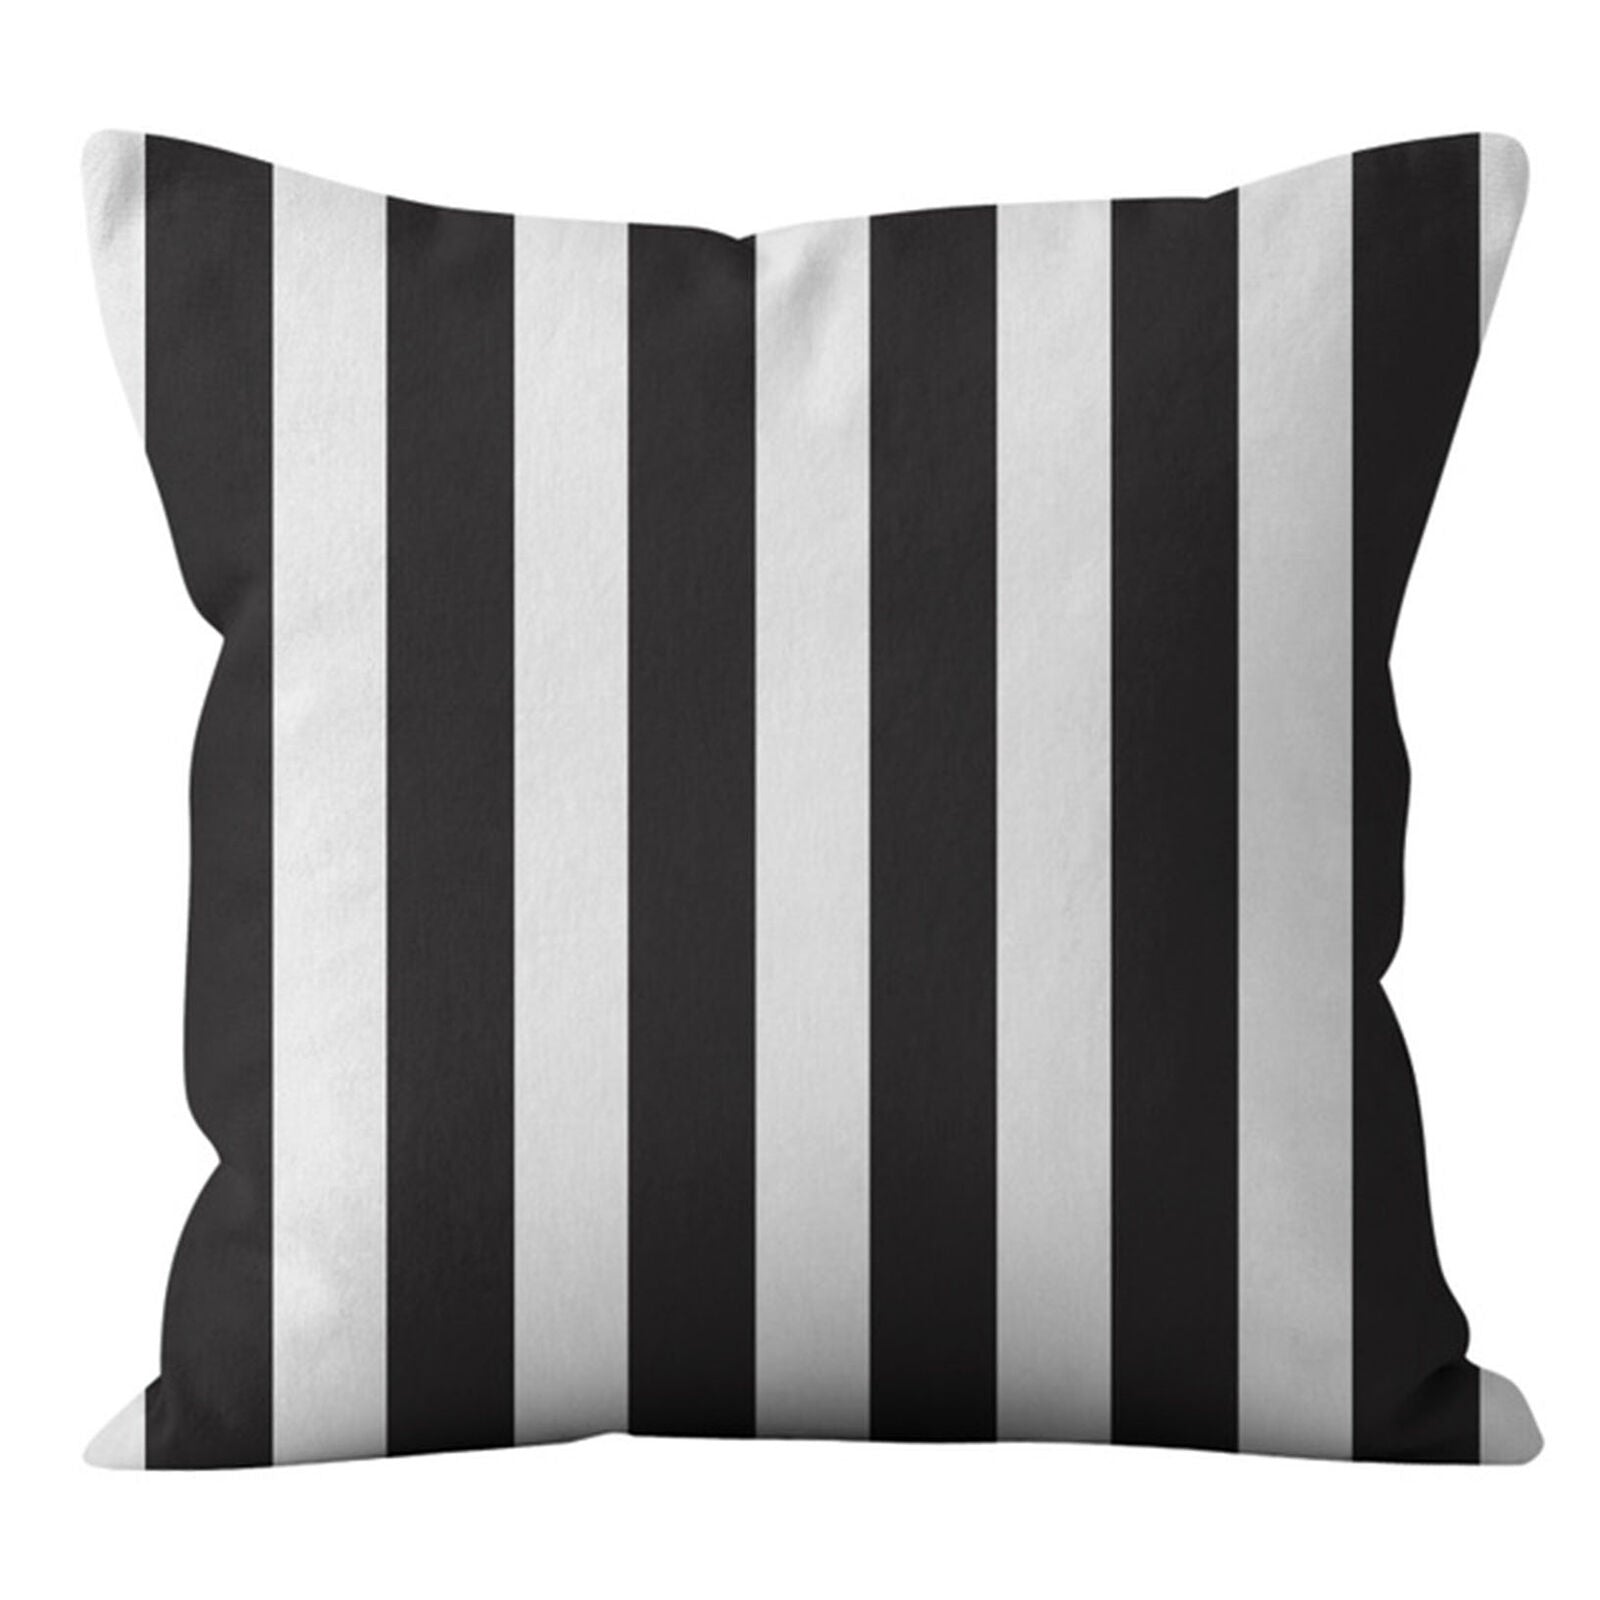 2 PCs Black and White Striped Decorative Throw Pillow Cushion Covers 18x18